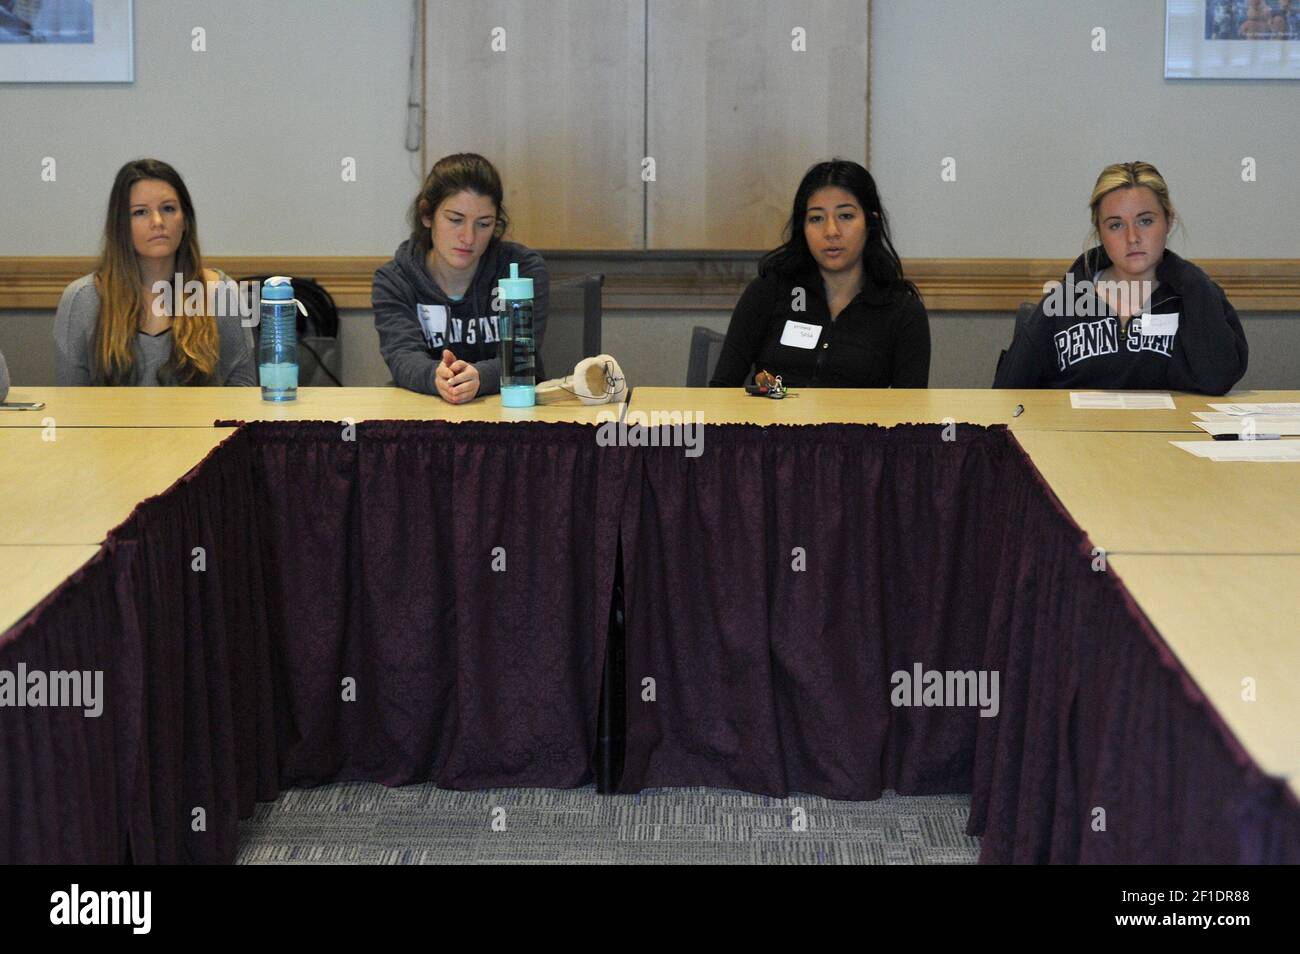 Penn State students participate in a McClatchy Newspapers focus group at the university's student union building on Dec. 3, 2015 in University Park, Pa. (Photo by Christopher Weddle/Centre Daily Times/TNS) *** Please Use Credit from Credit Field *** Stock Photo